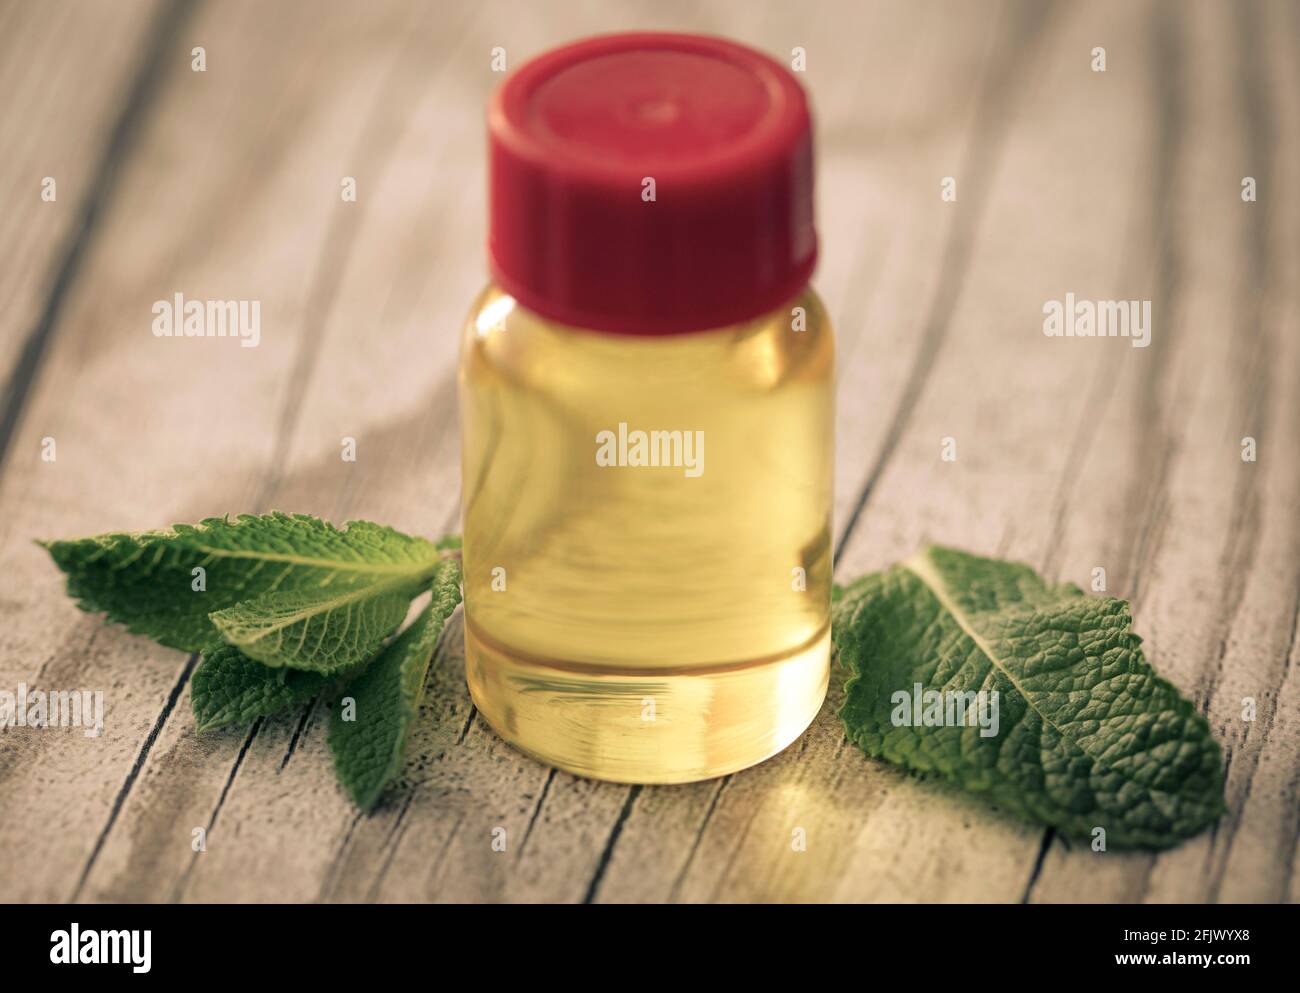 Mint leaves with essential oil in a bottle Stock Photo